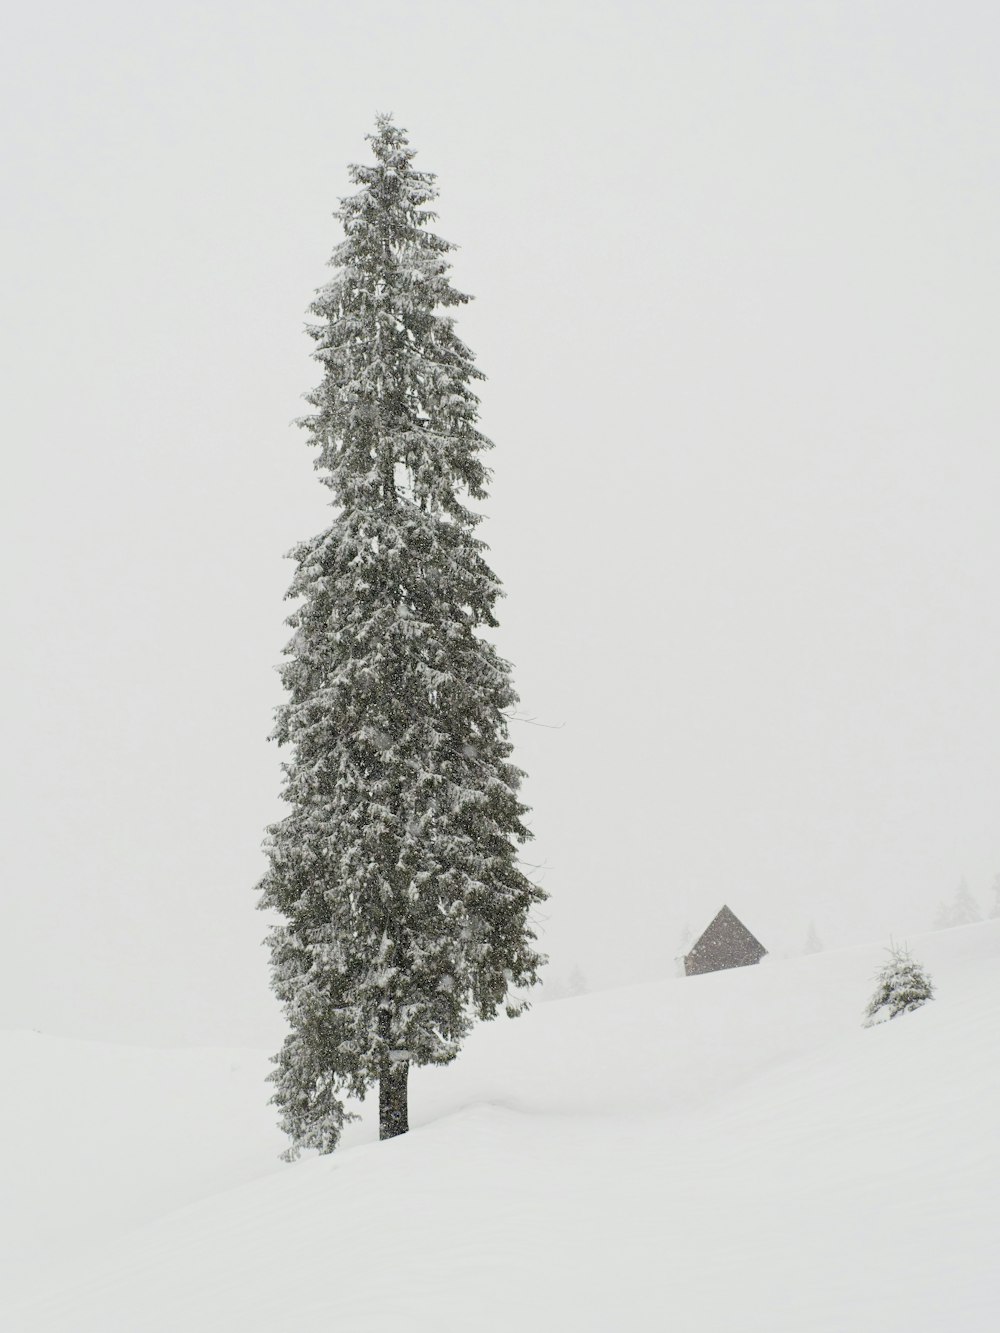 a lone pine tree stands in the snow